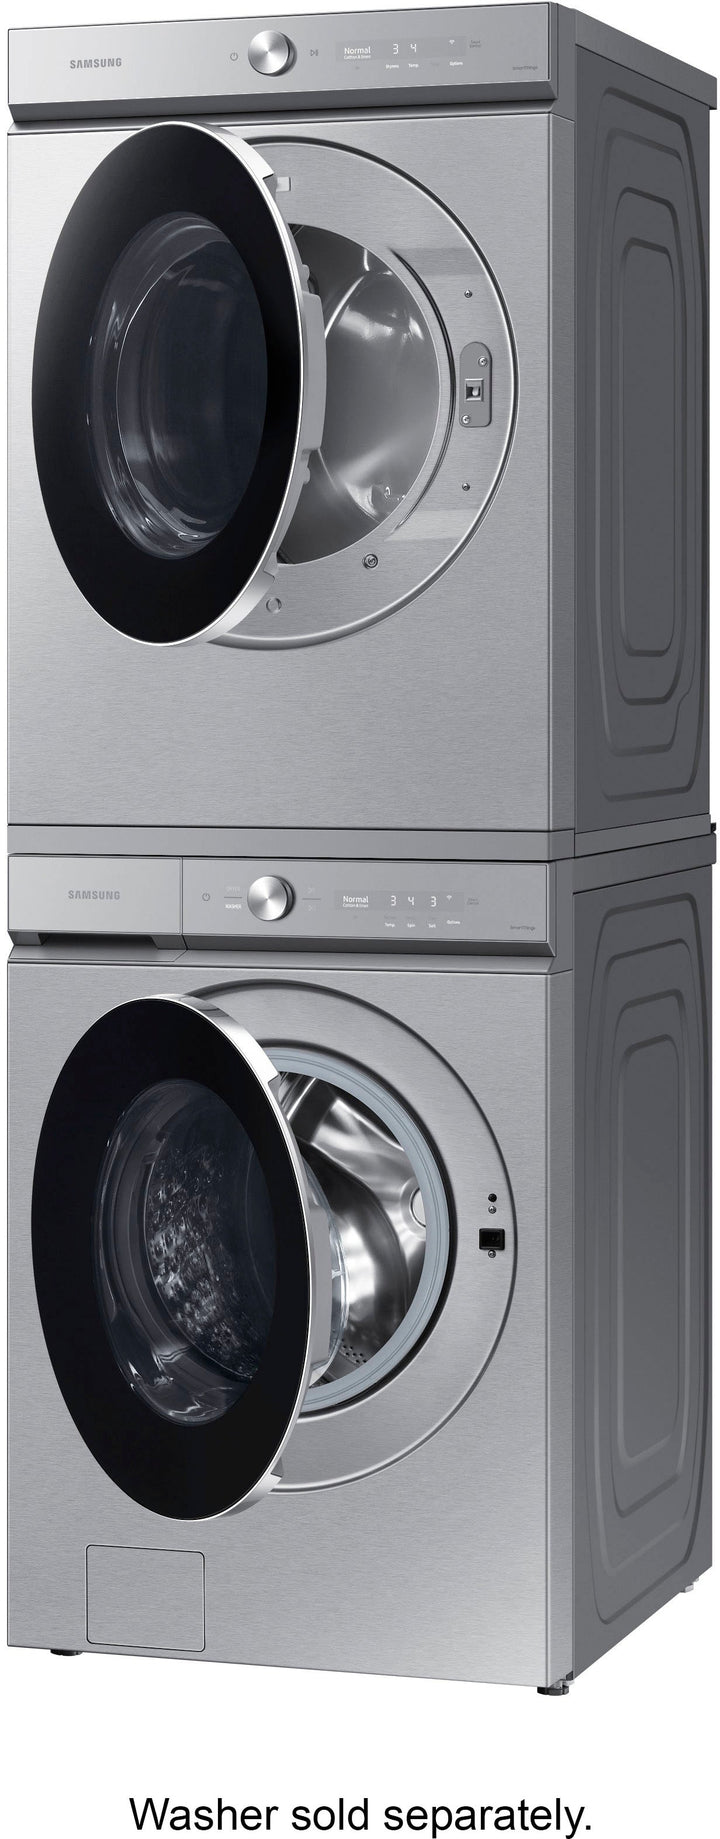 Samsung - Bespoke 7.6 cu. ft. Ultra Capacity Electric Dryer with AI Optimal Dry and Super Speed Dry - Silver steel_9